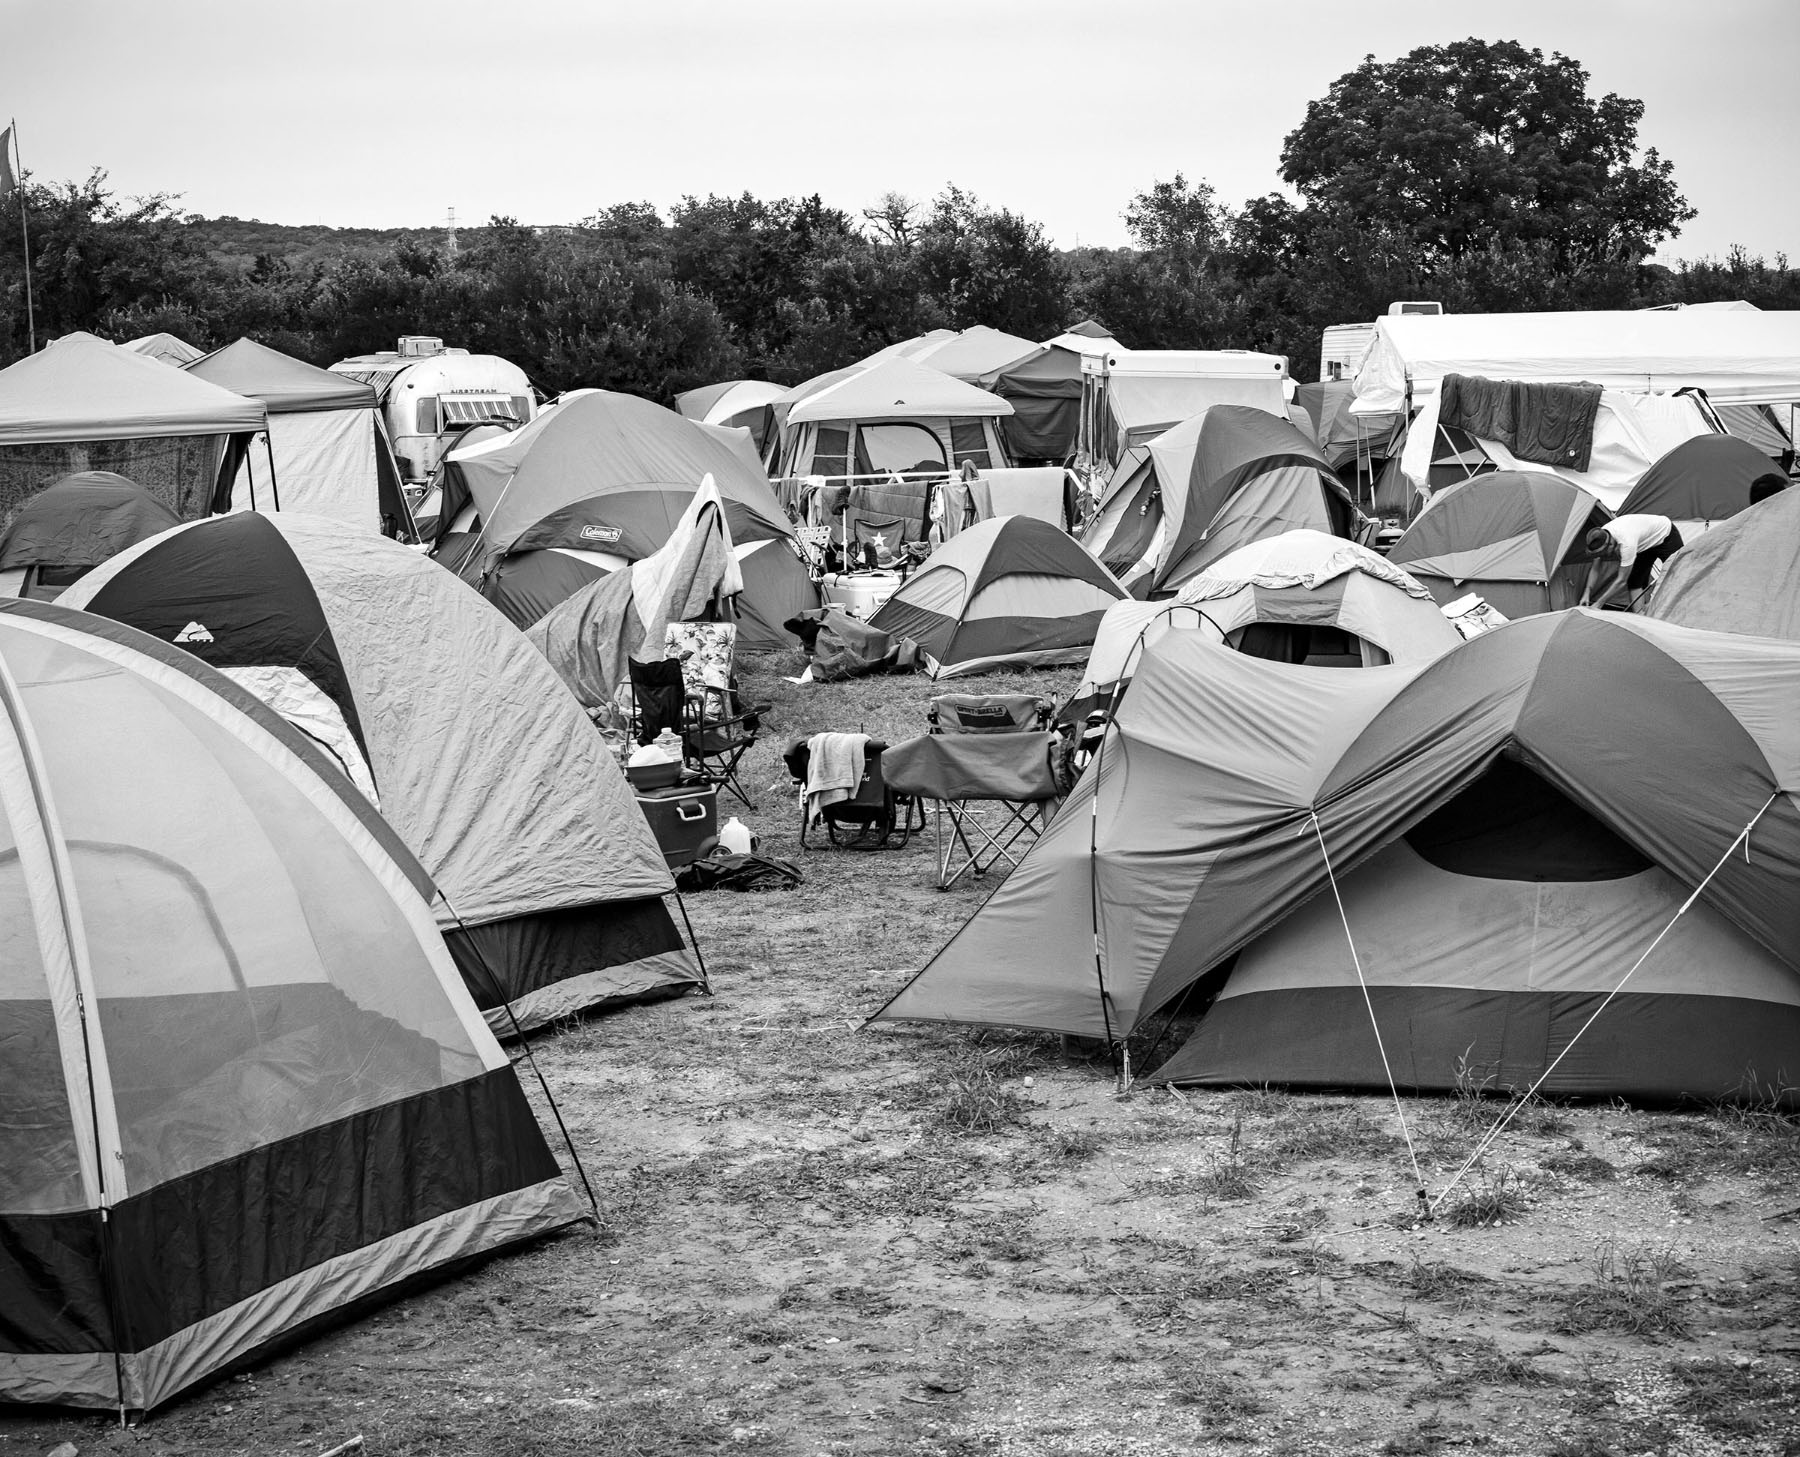 A black and white photo of a group of tents